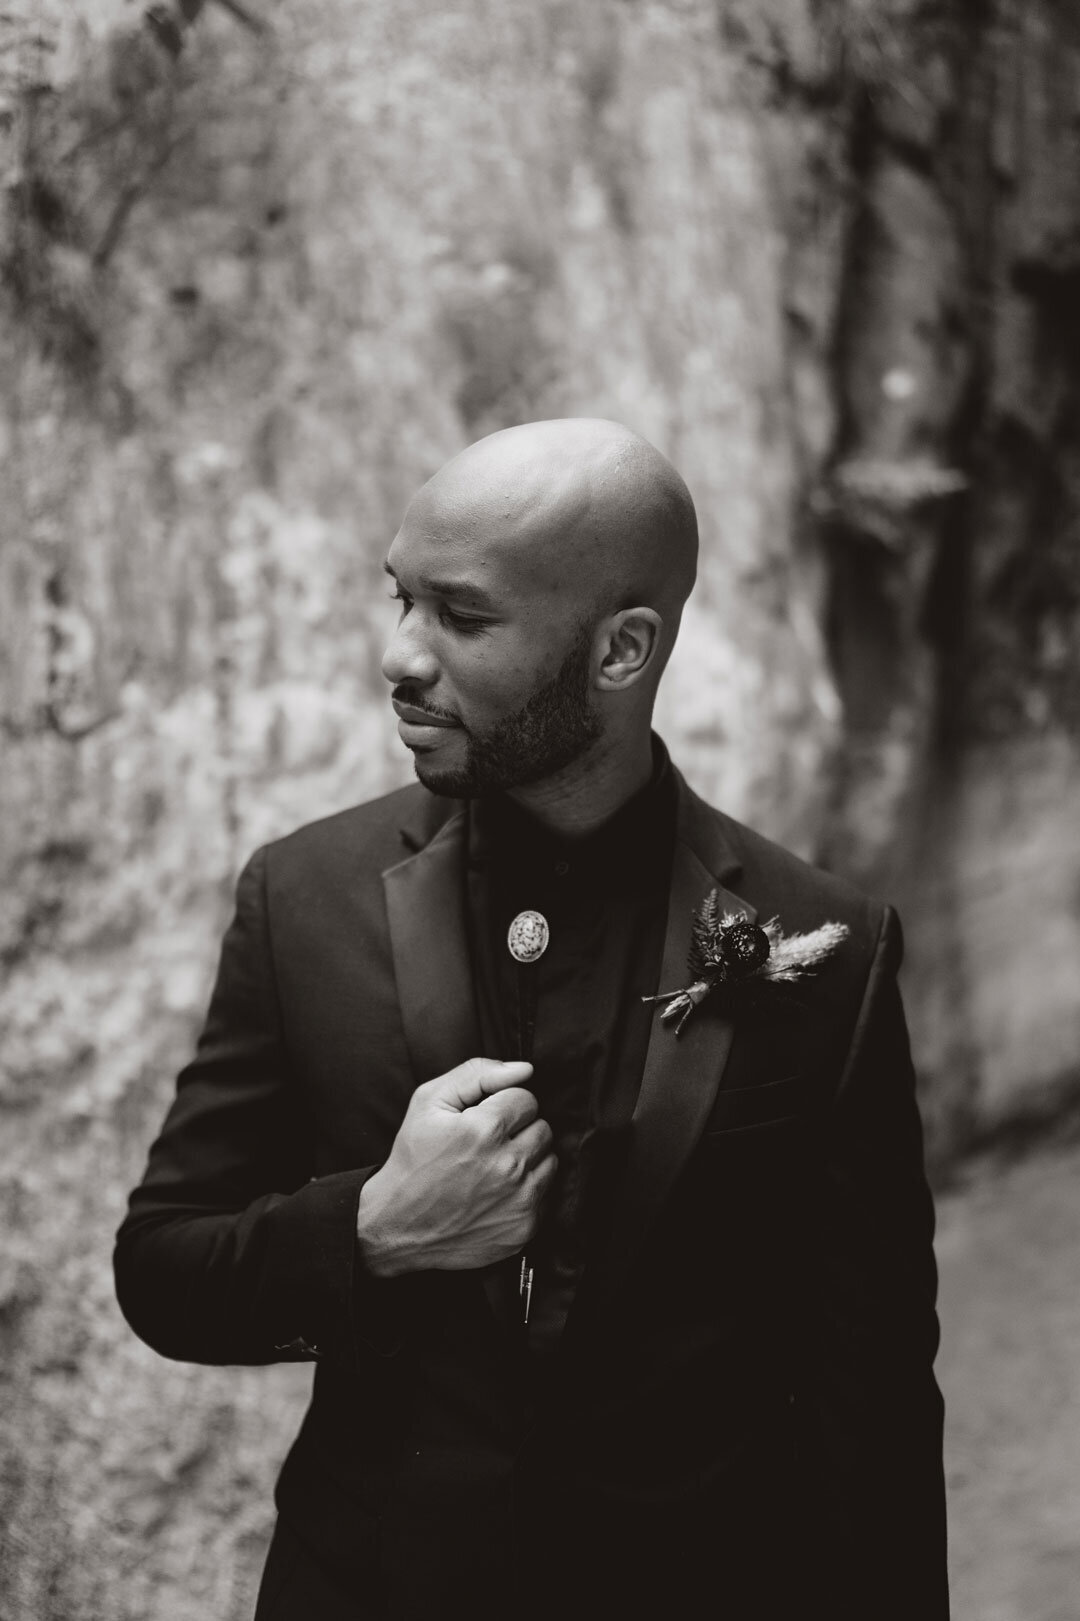 Black and white photo of a Black groom wearing a black suit